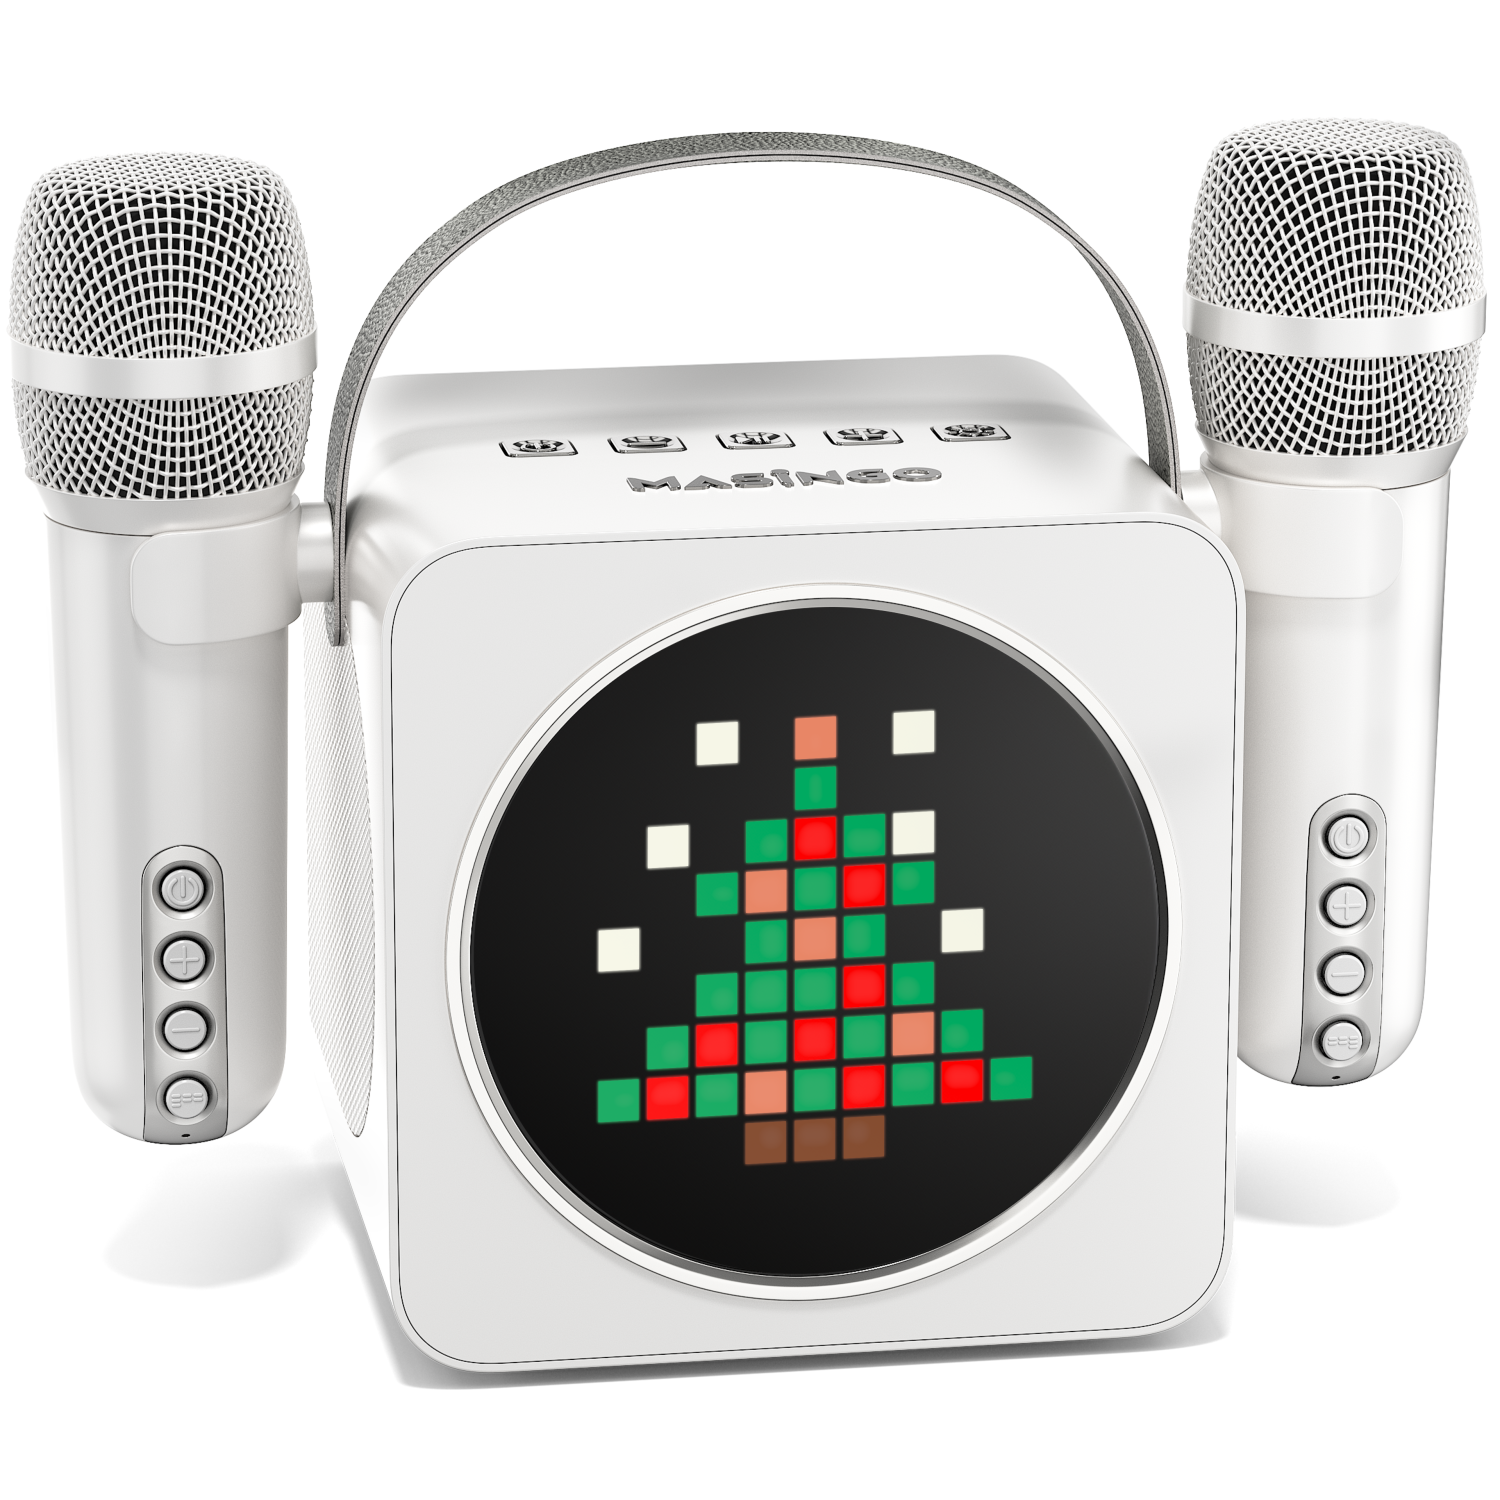 Portable Mini Karaoke Machine for Kids and Adults with Dual Wireless Bluetooth Microphones, Animated LED Display, USB/Aux/MicroSD, Voice Effects, Fun Karaoke Toy for Girls and Boys